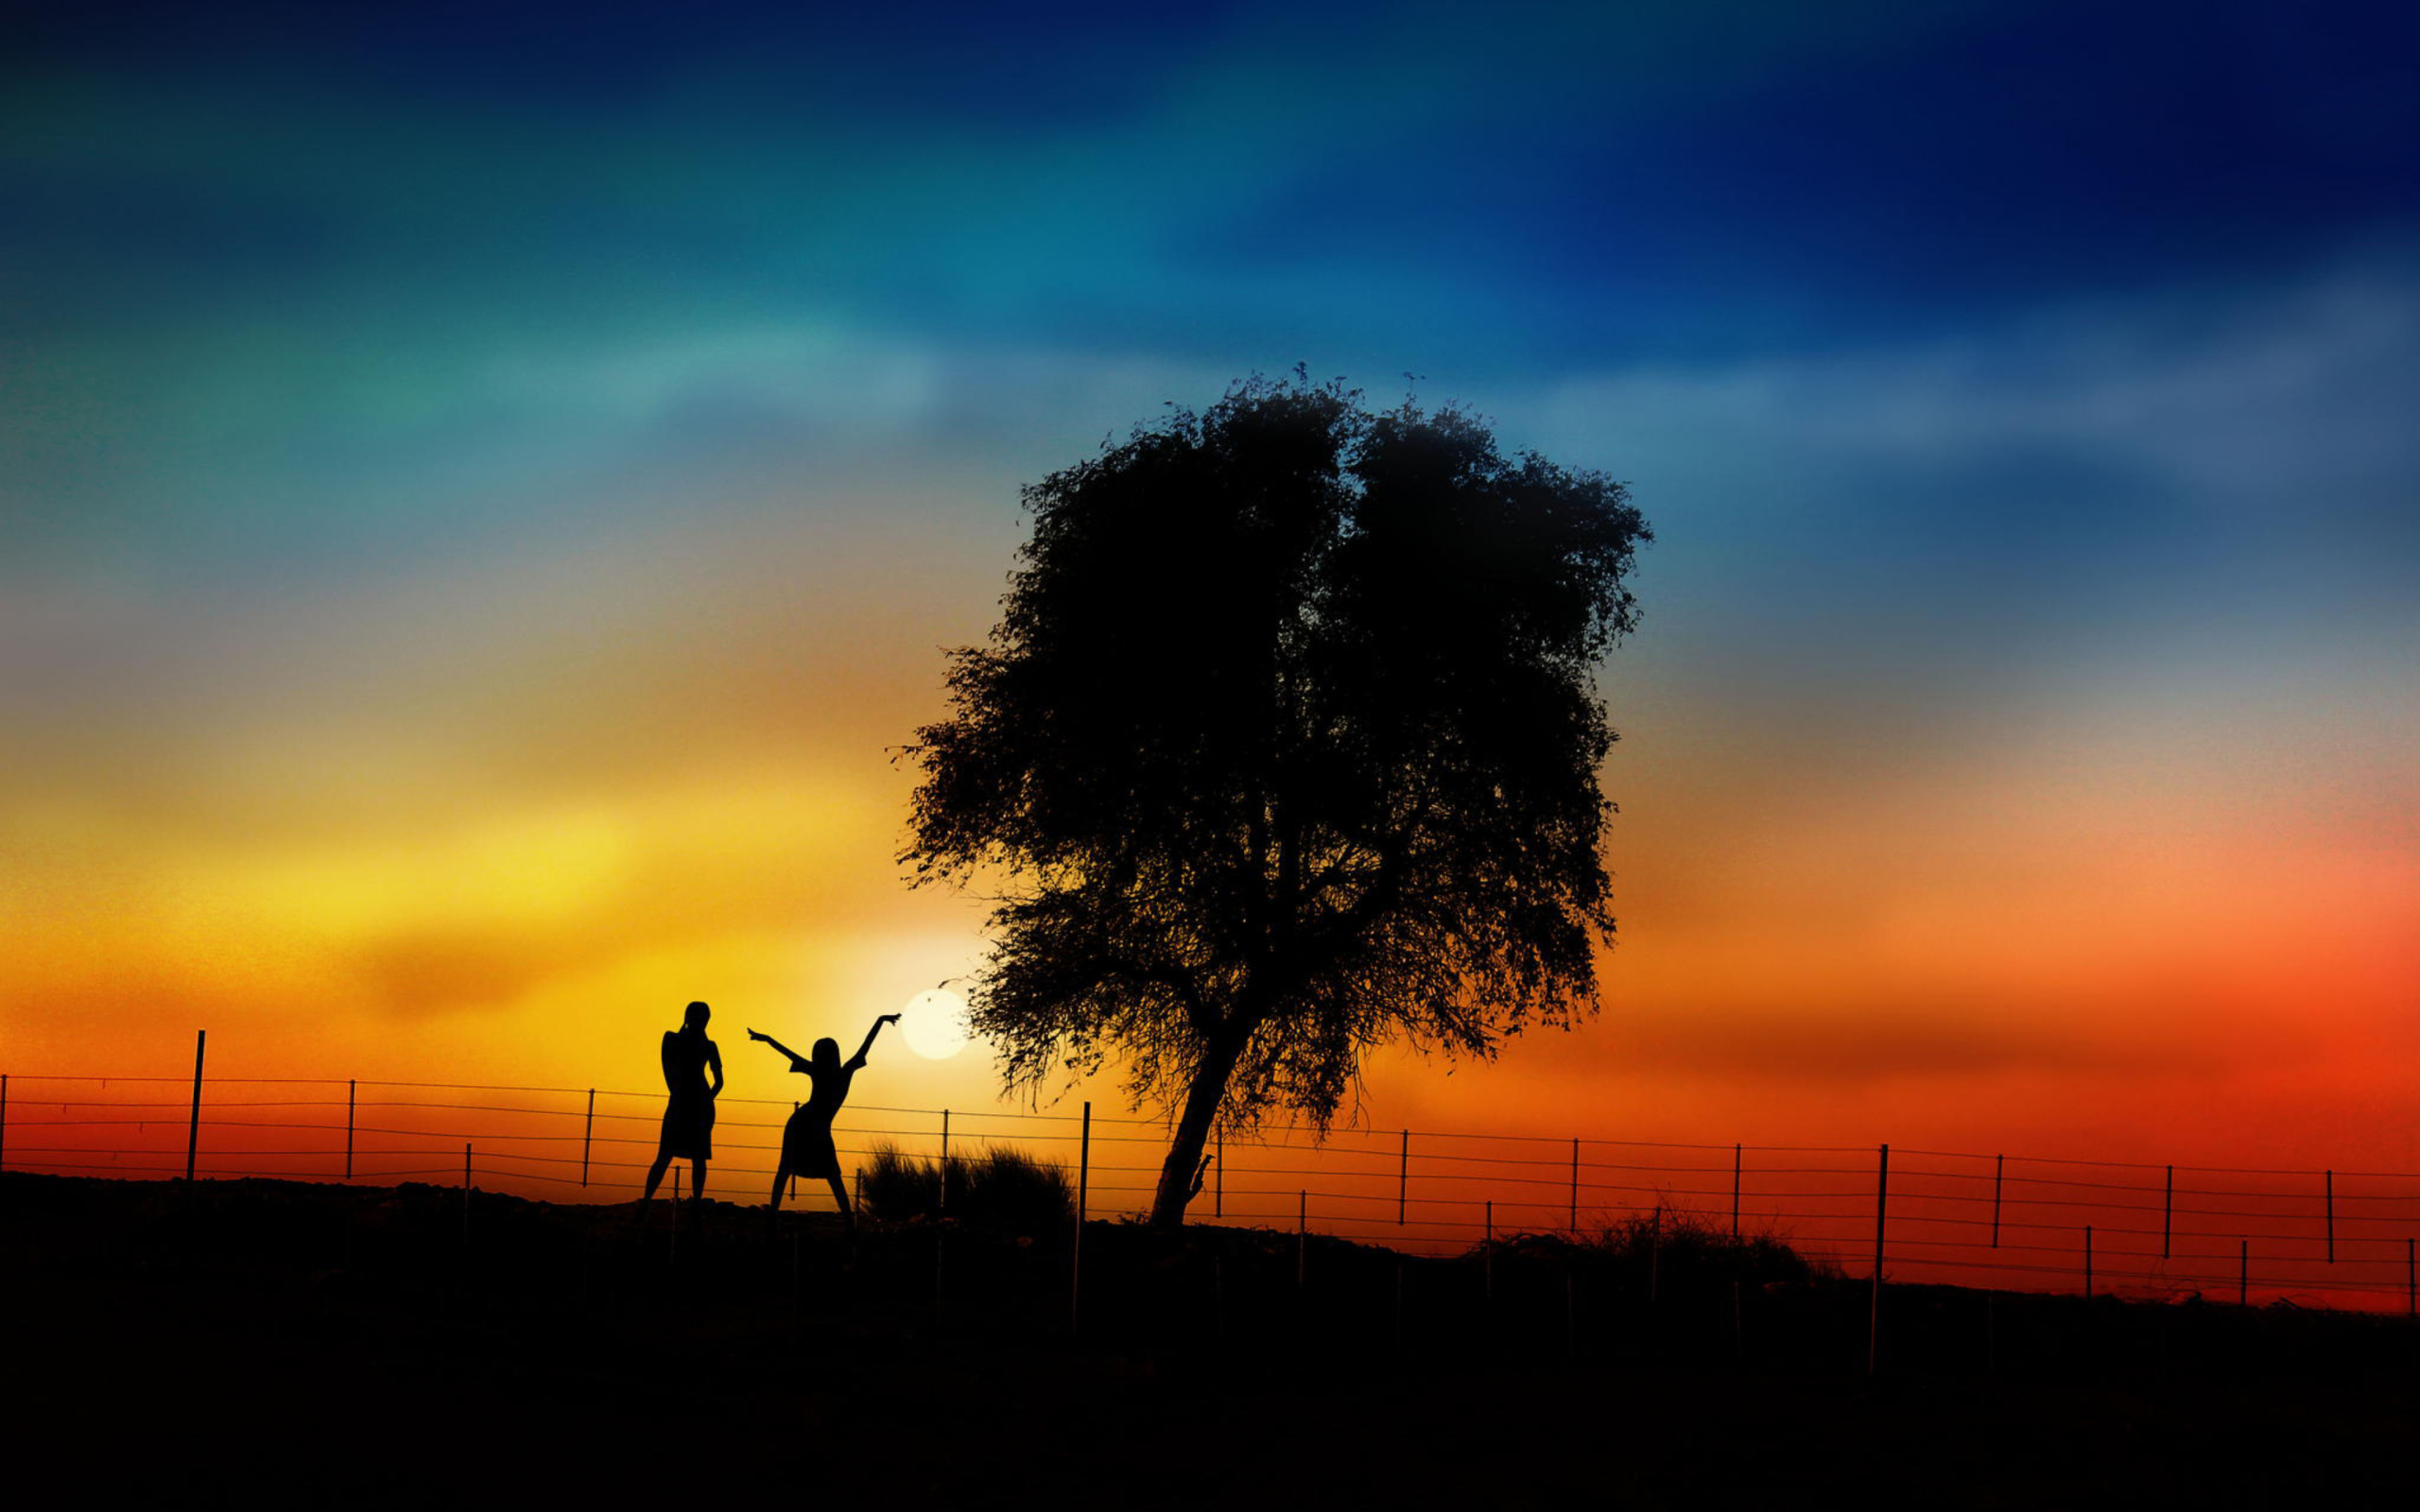 Das Couple Silhouettes Under Tree At Sunset Wallpaper 2560x1600